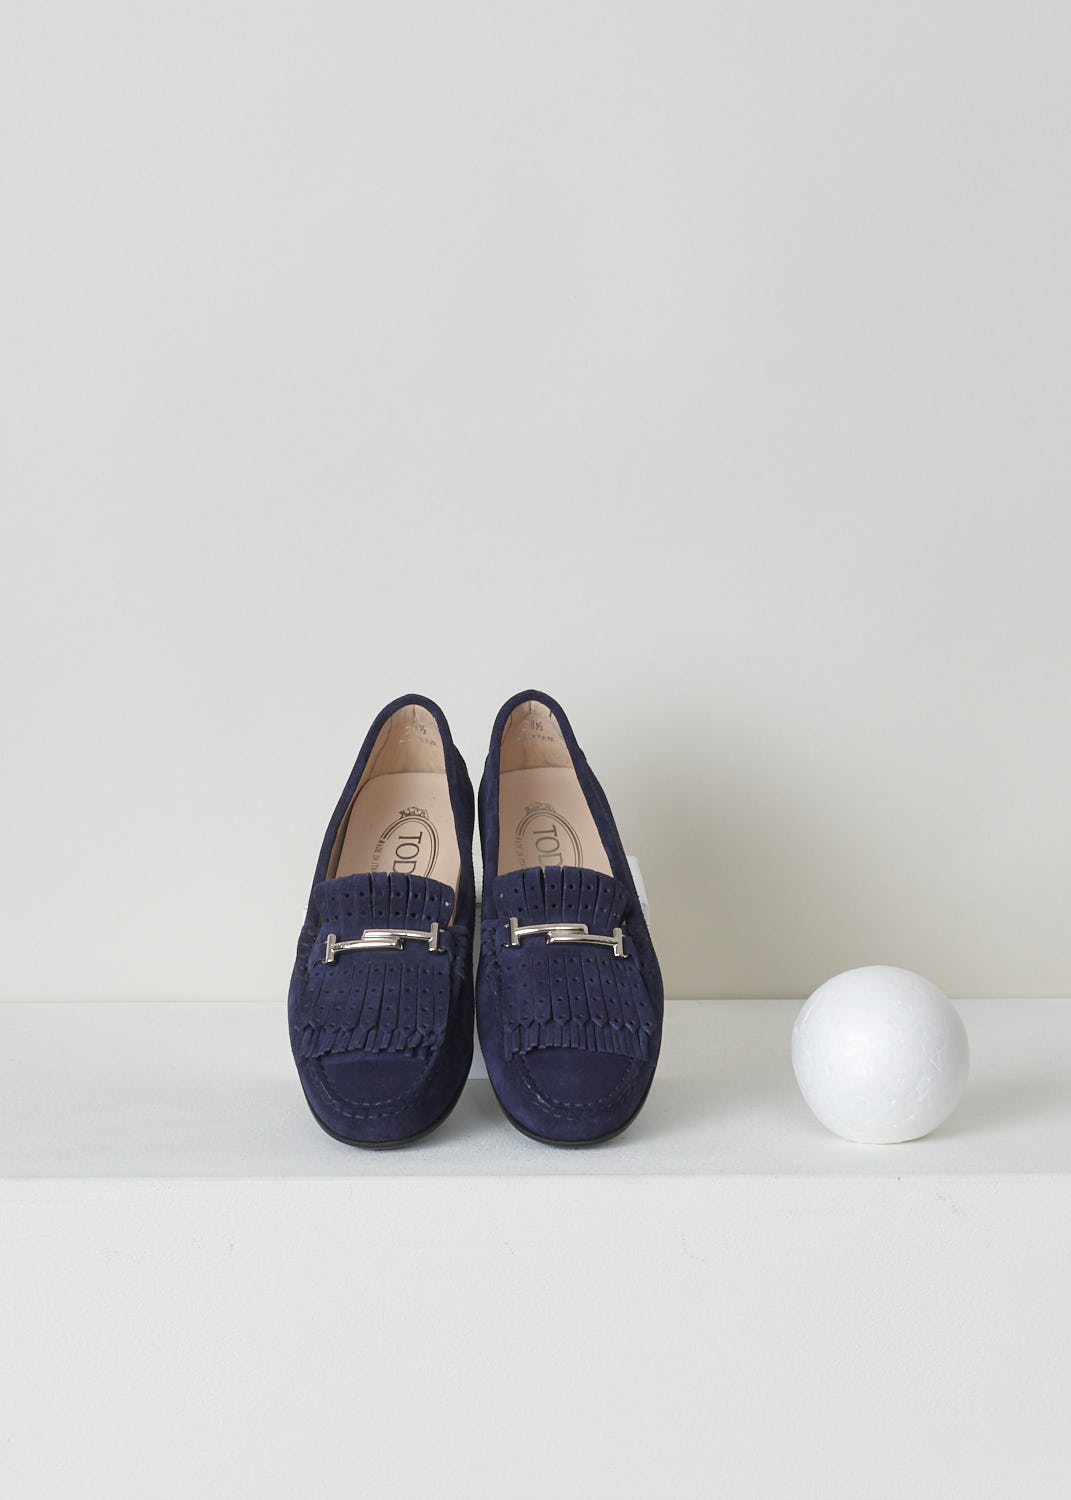 TODS, BLUE SUEDE MOCASSINS WITH BUCKLE, XXW0LU0Y470RE0U824, Blue, Top, Blue suede loafers with a rounded toe. These shoes feature fringed tassels and a silver-toned buckle. Noticeable are the rubber soles with studded profile that extends further to the rear trim.
